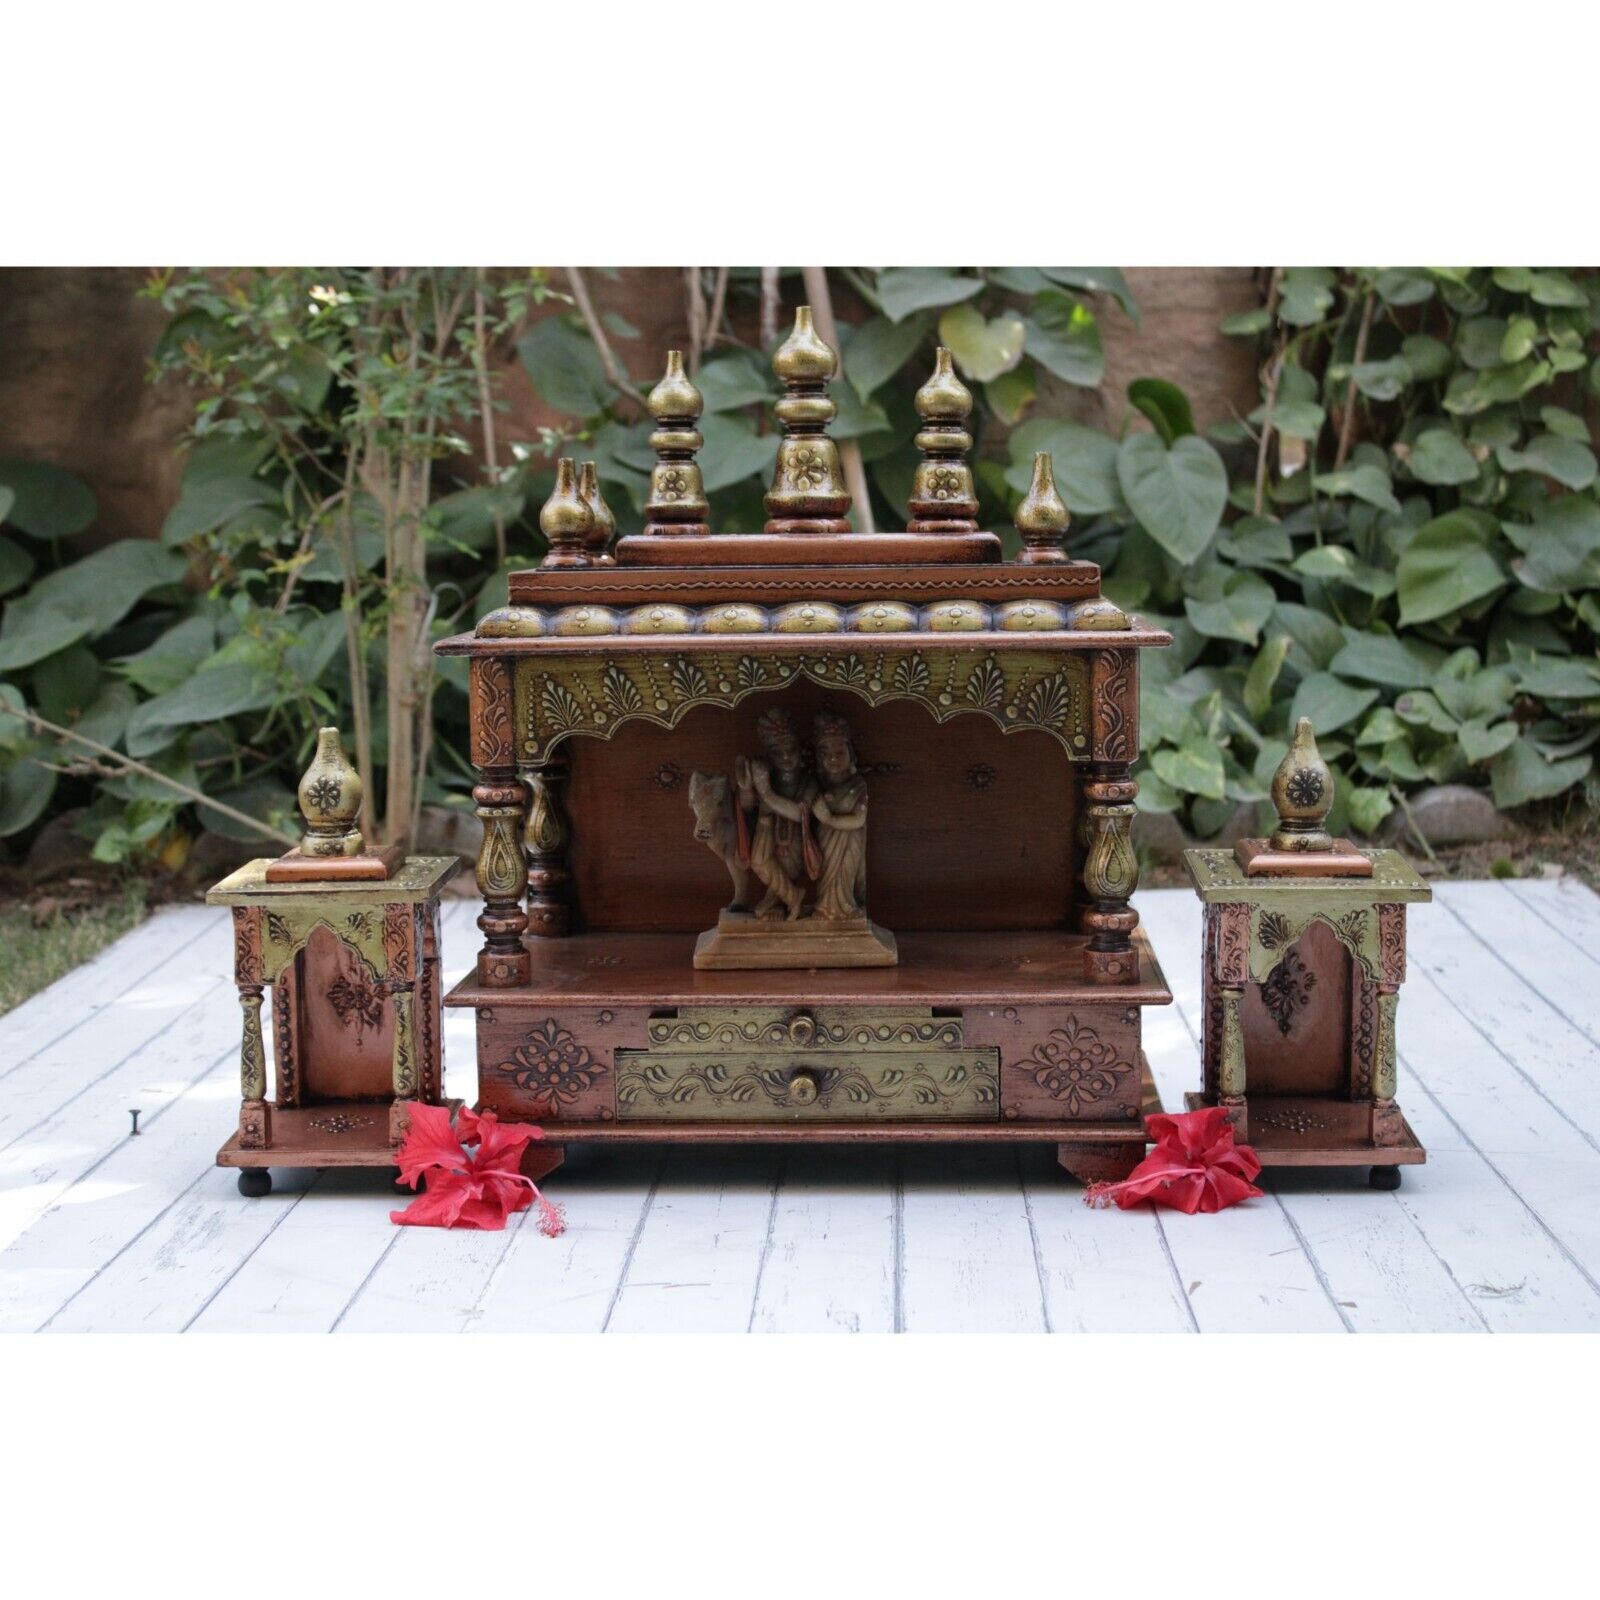 Wooden Temple Buy Big One & Get Two Free Big Size Hindu Pooja Mandir For Home